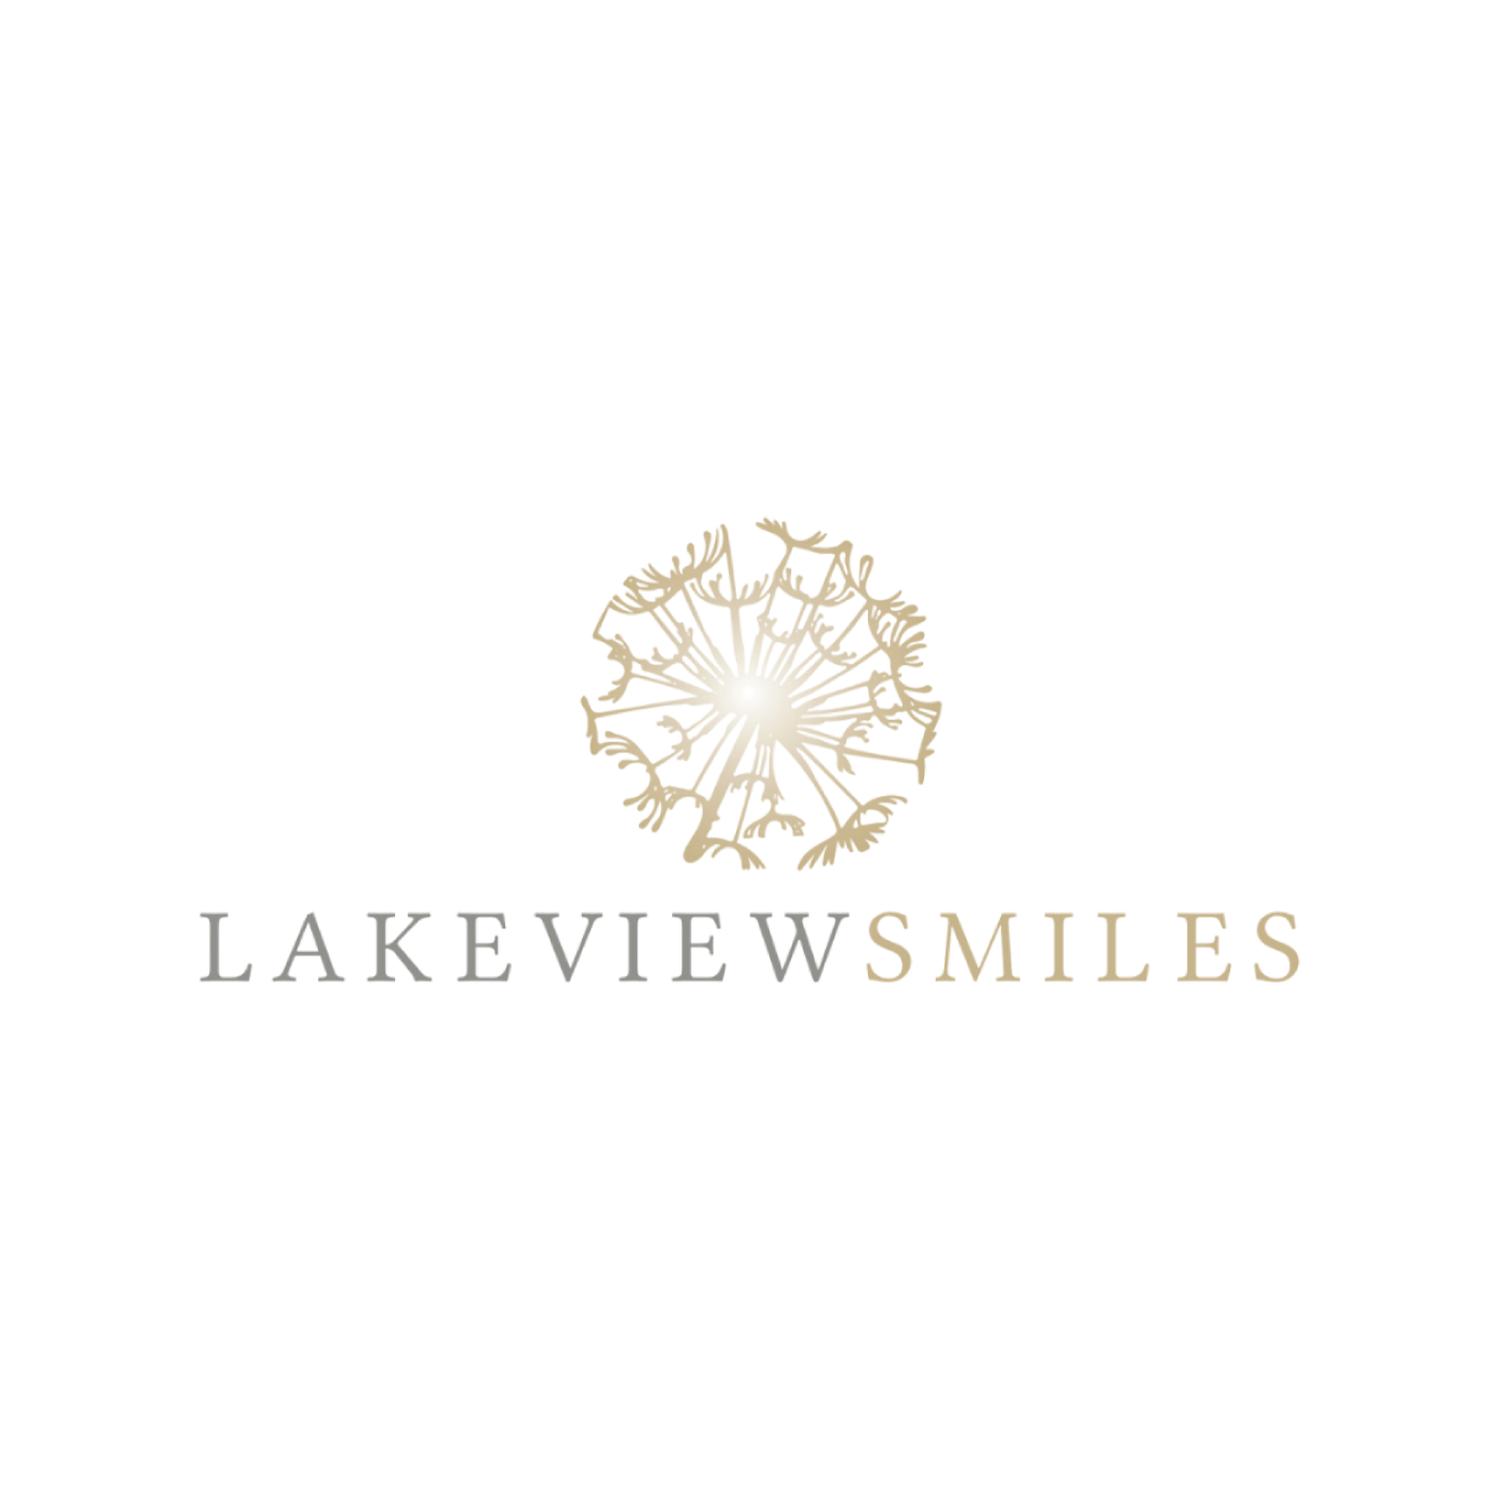 Lakeview Smiles - Lakeview Chicago (773)570-2549